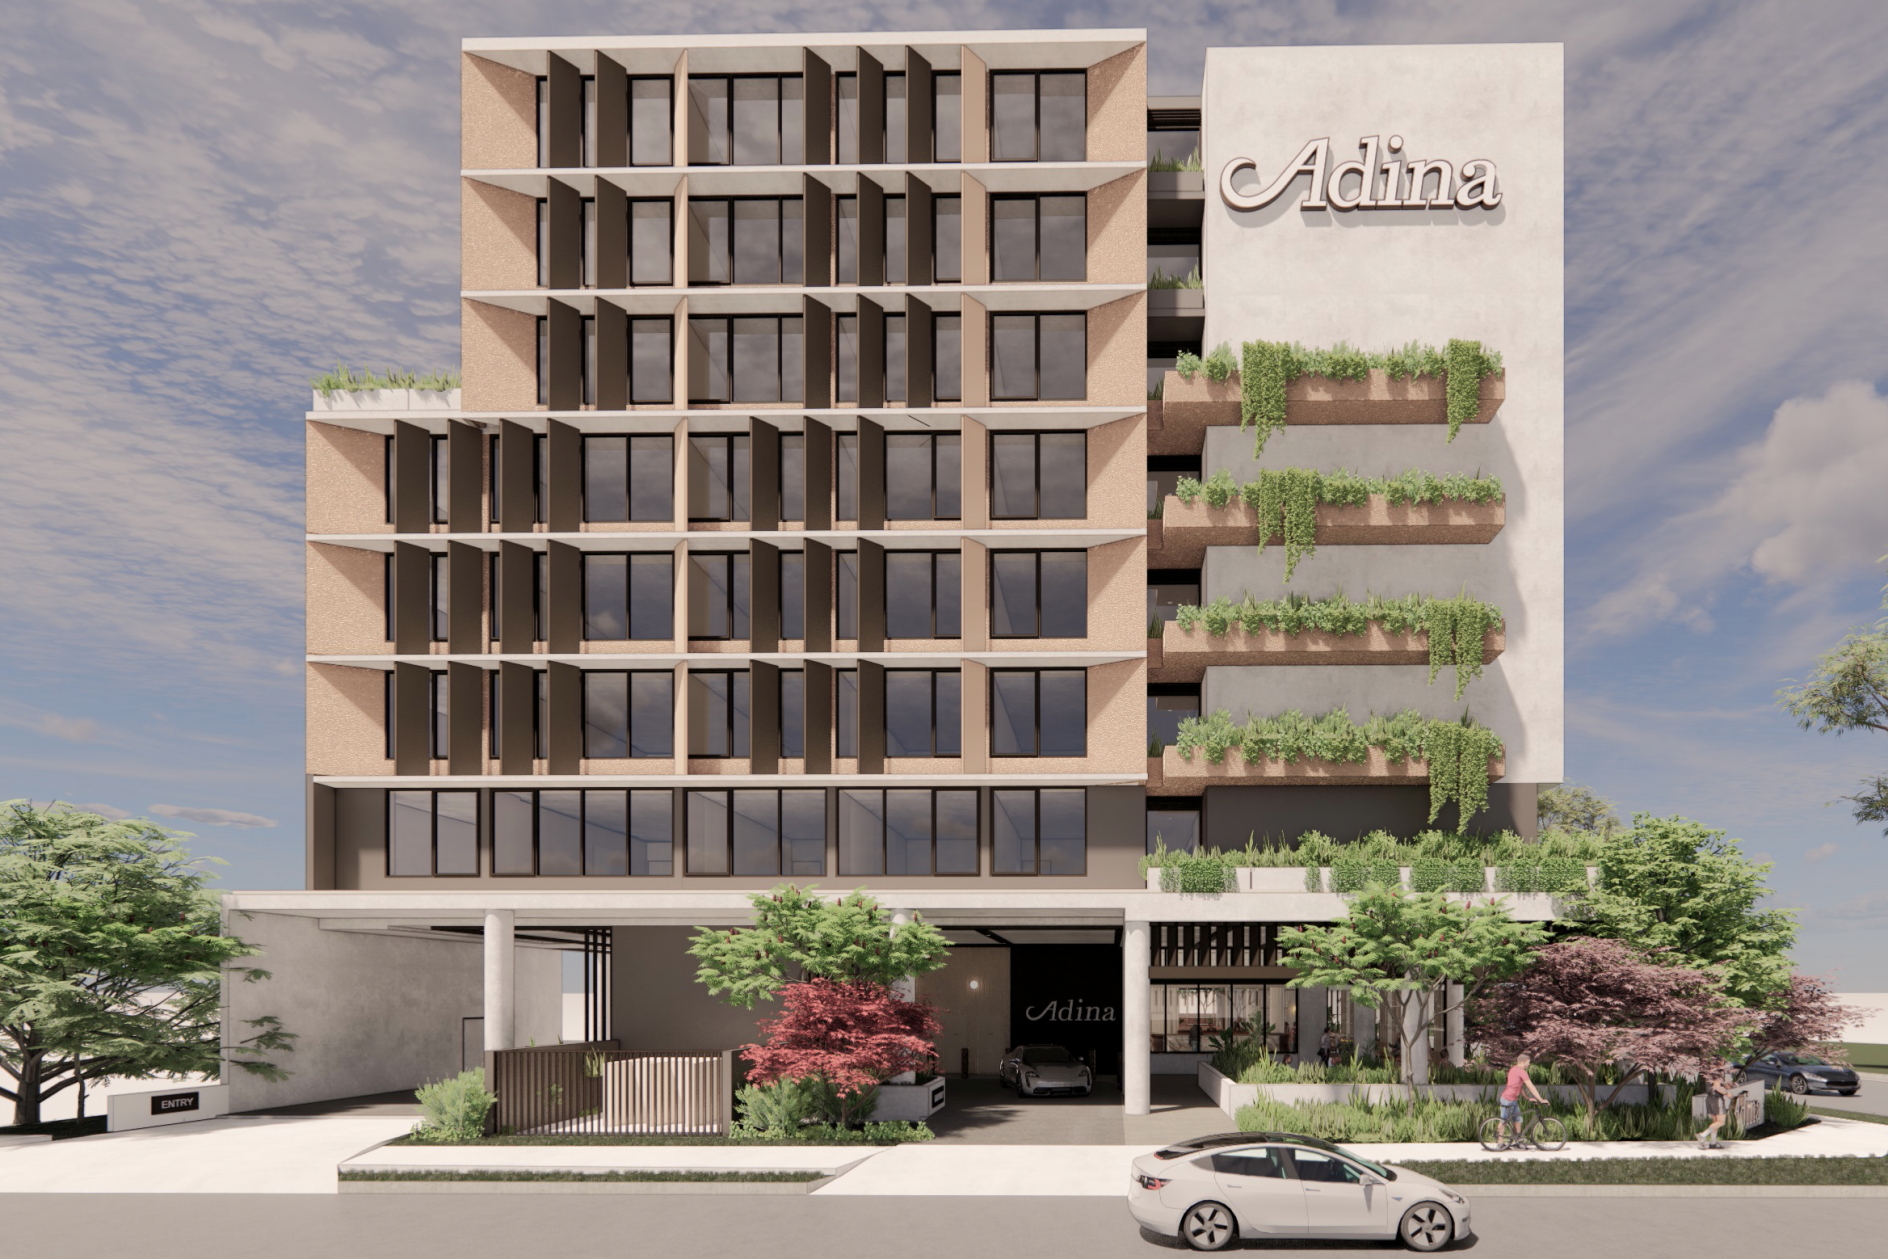 The 148-key Adina Apartment Hotel Chermside Brisbane is scheduled to open in 2025. Click to enlarge.